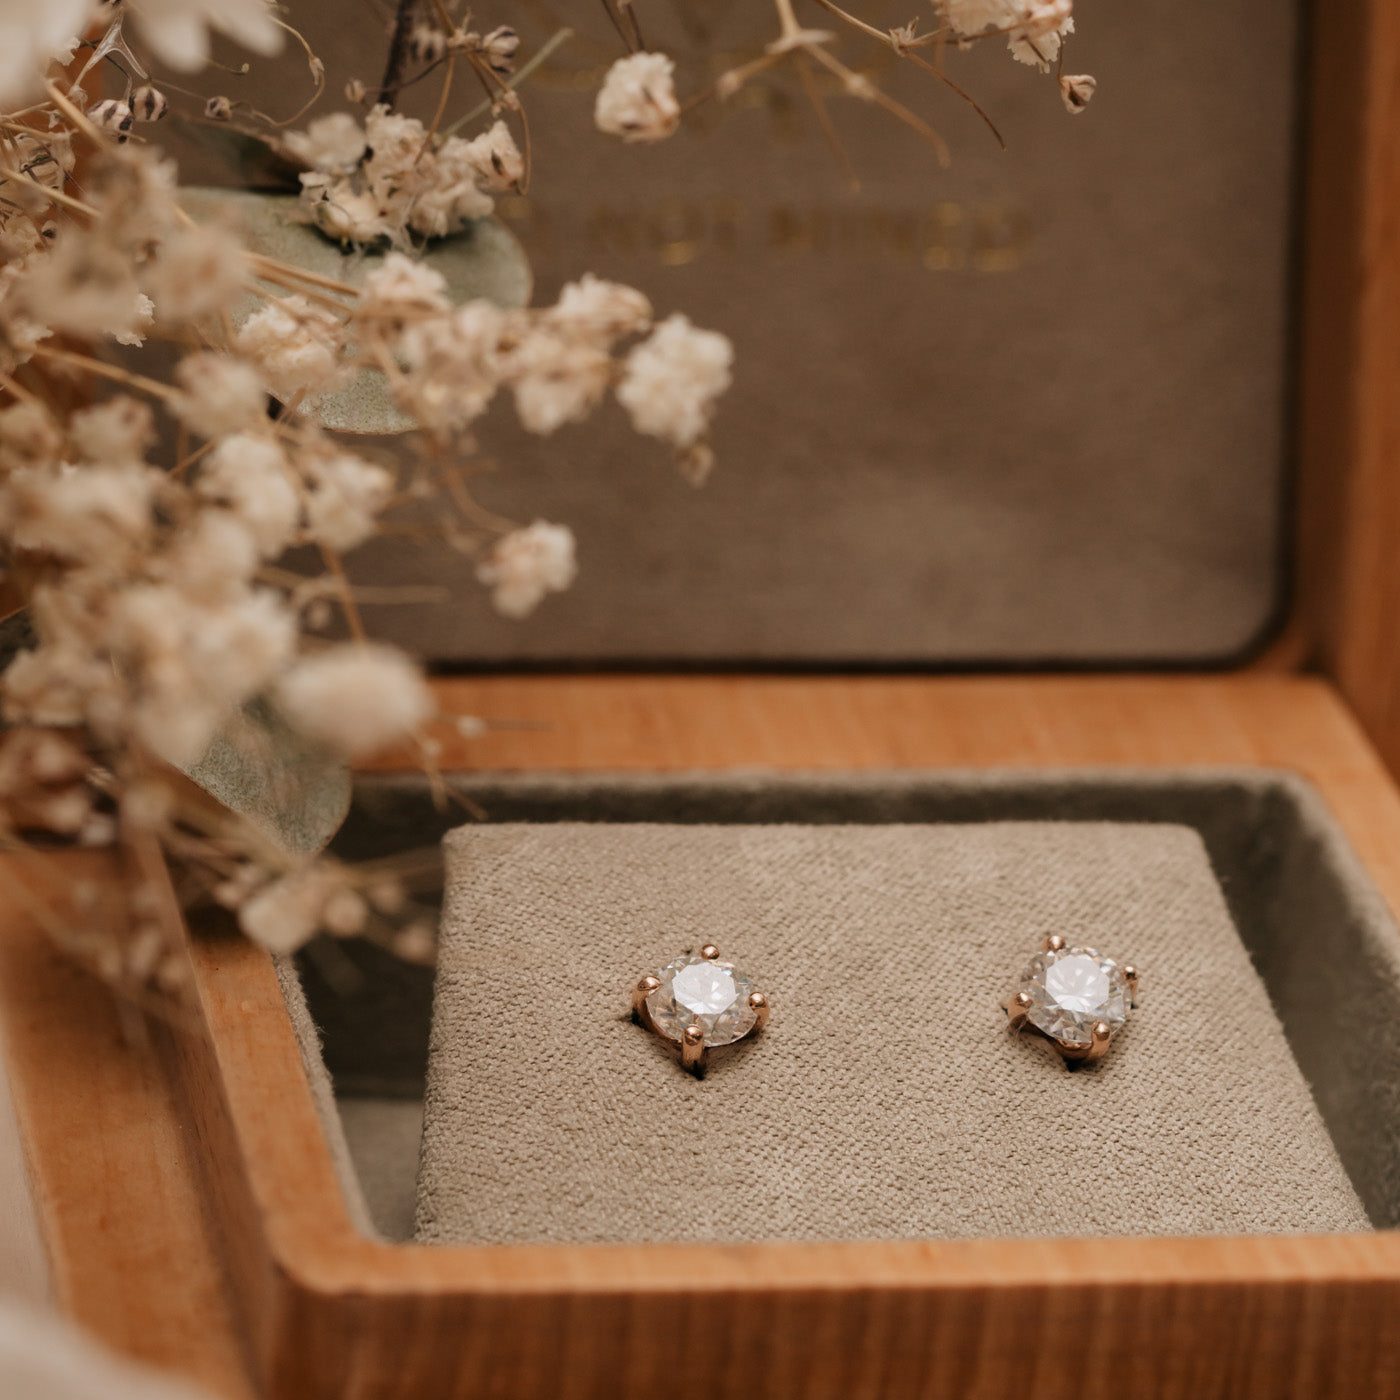 solitaire diamond style earrings in wooden box